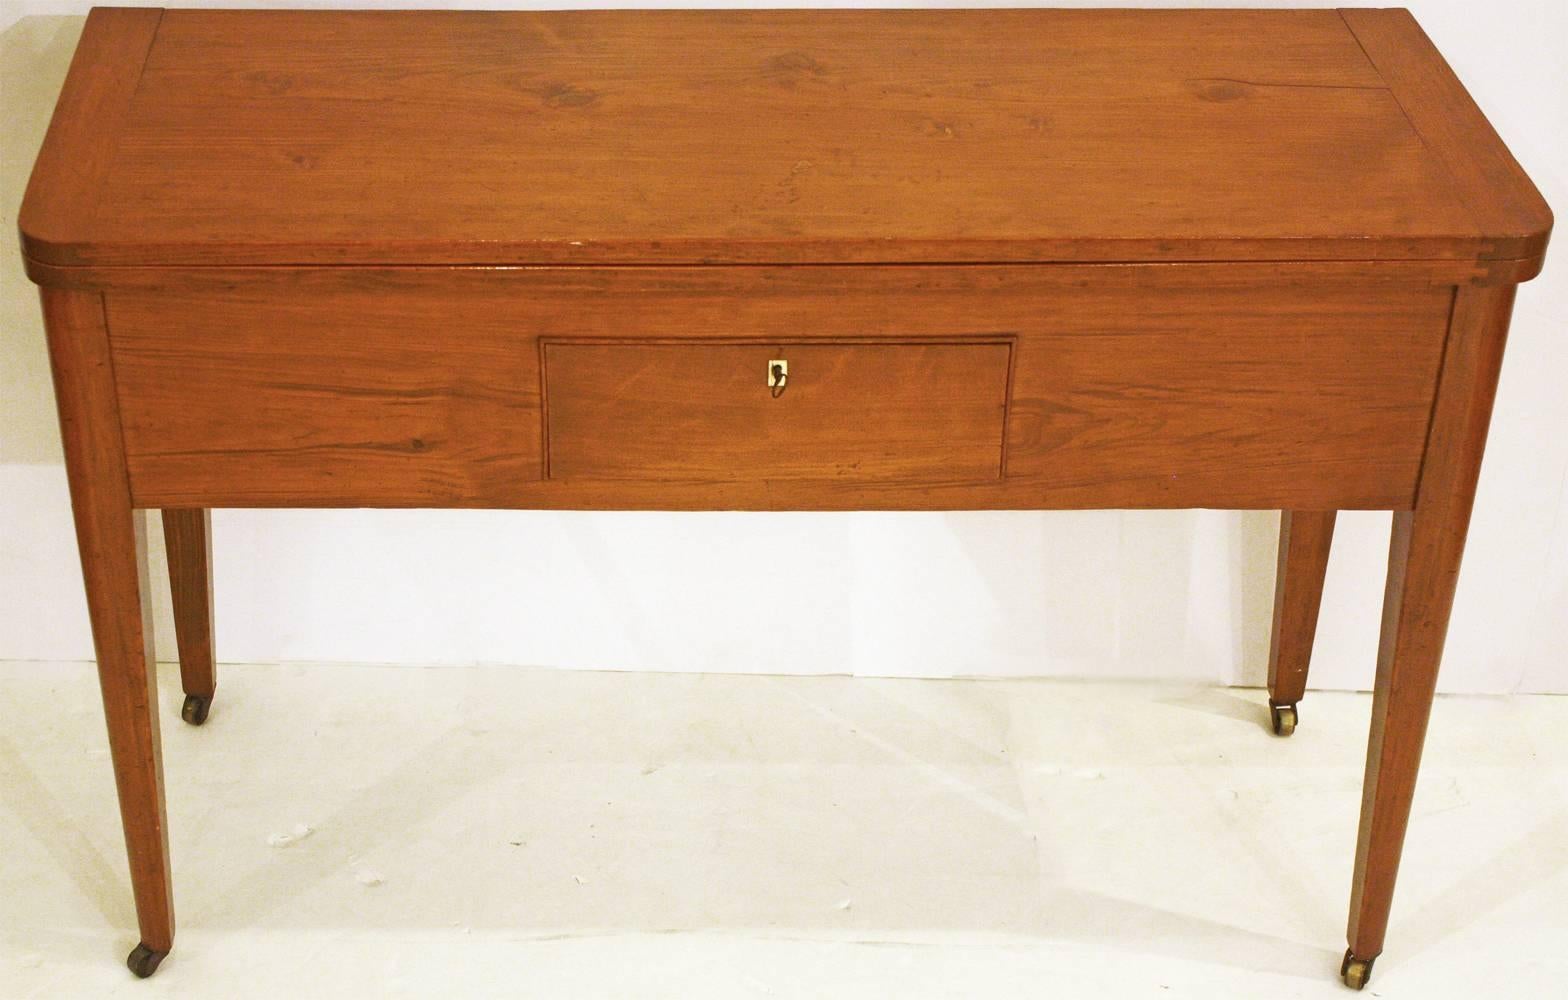 A small pine sideboard / table with flip top that swivels (so that one might sit comfortably under it on either end), single small drawer with ivory-like keyhole escucheon (with key), four (4) tapered pencil legs with brass castors, handmade,